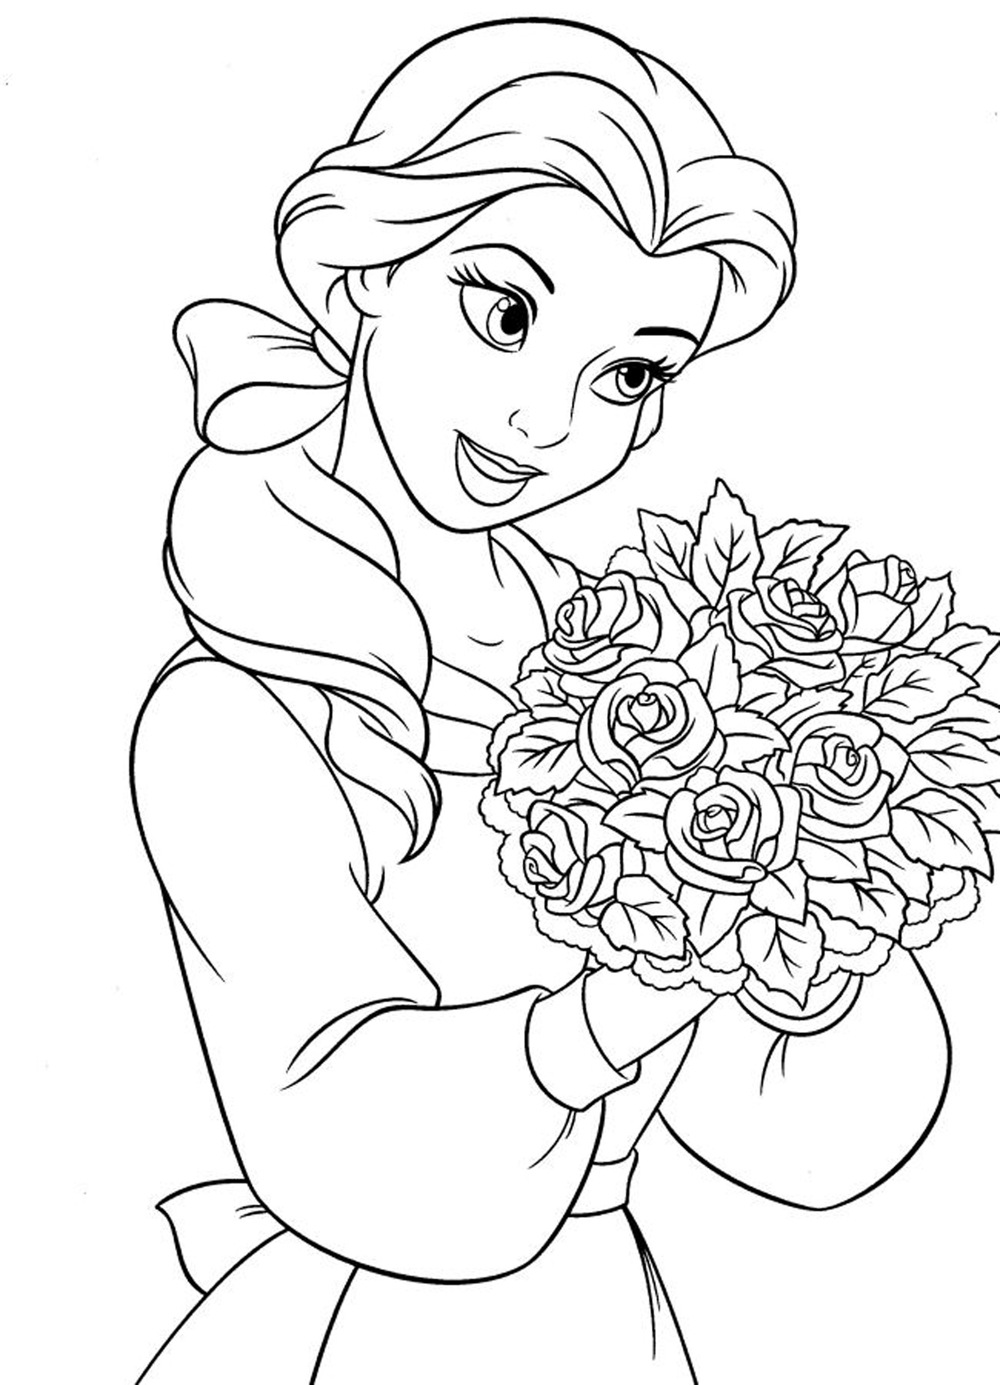 Free coloring pages of disney prinzessinnen